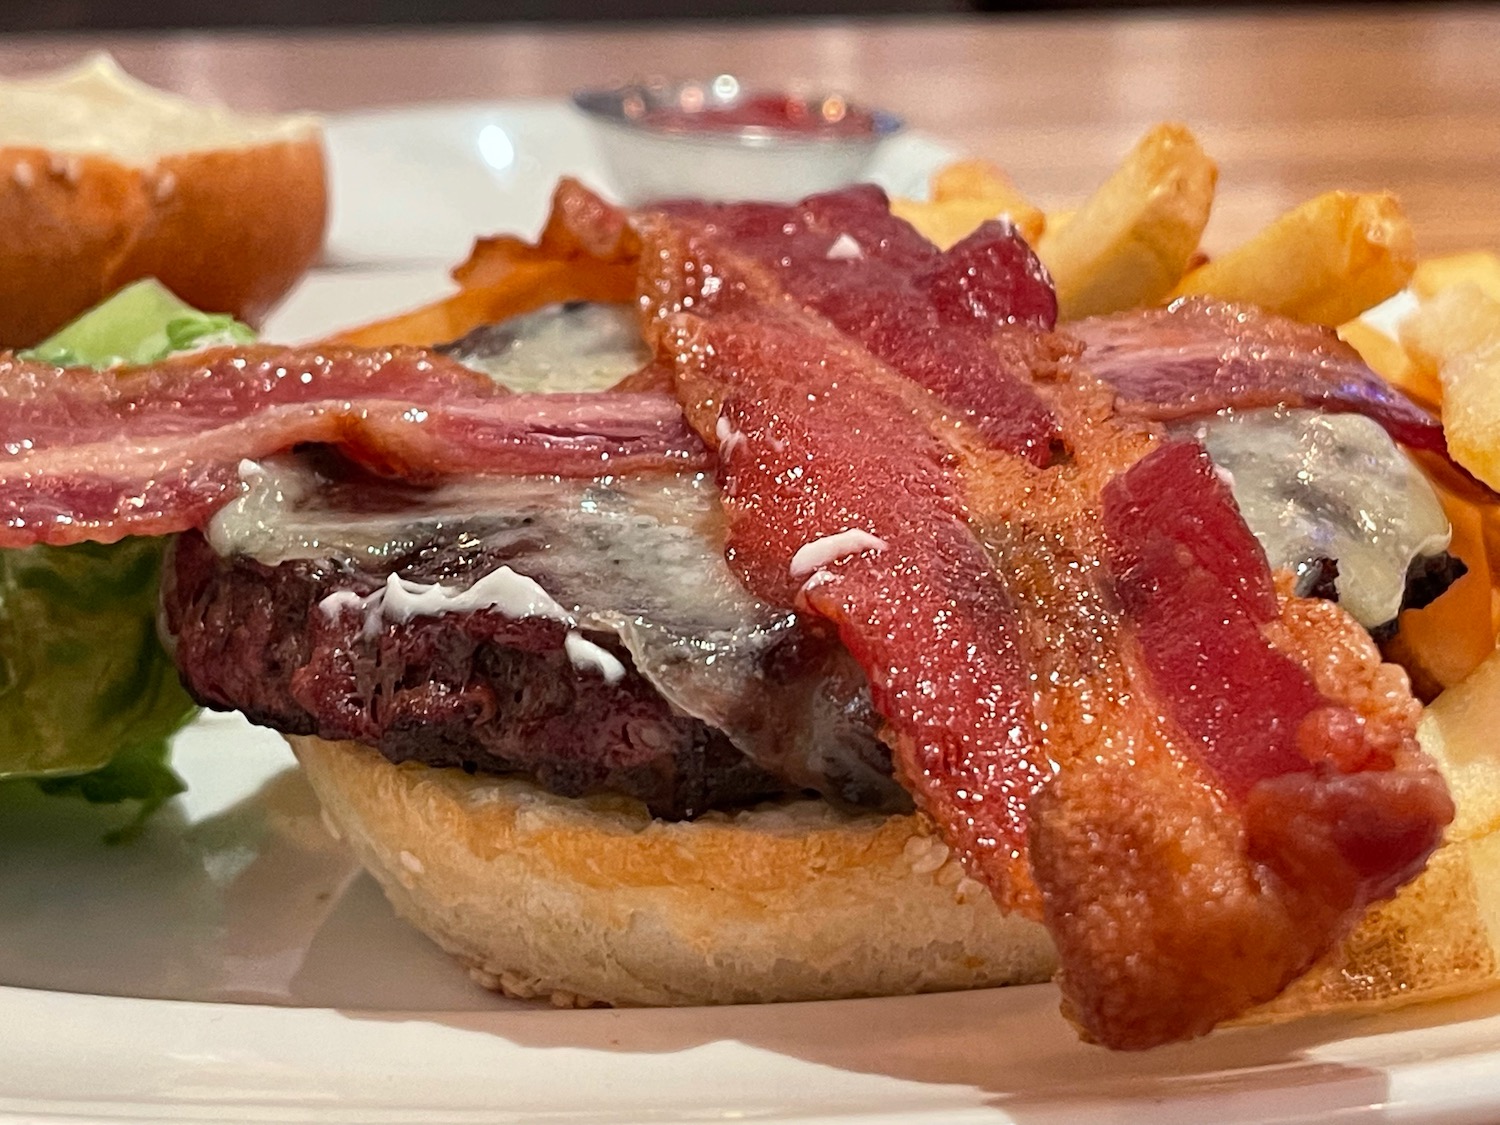 a burger with bacon and fries on a plate